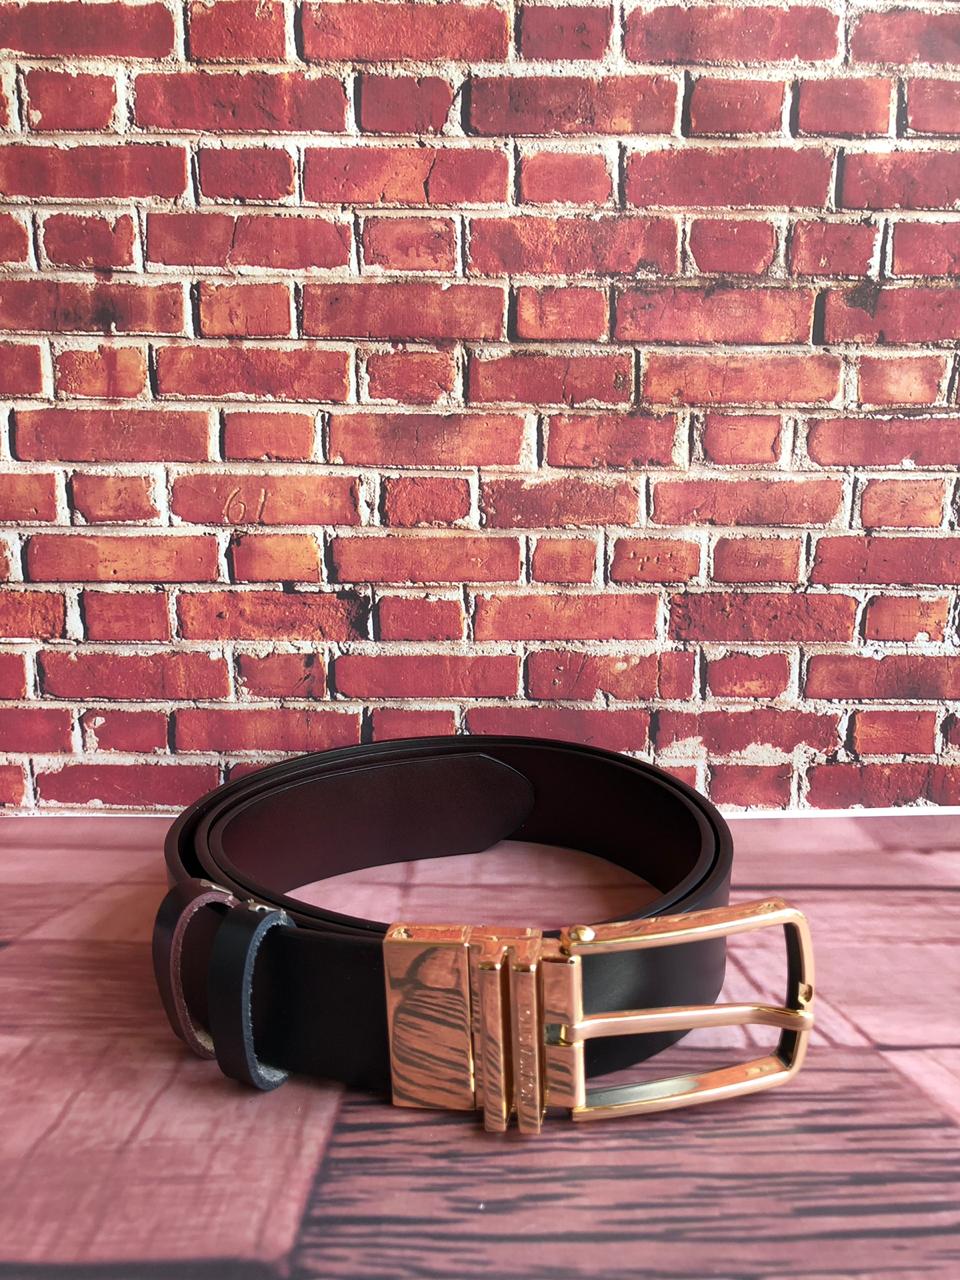 FunkyTradition Golden Black and Brown Reversible Mens Leather Belts - FunkyTradition